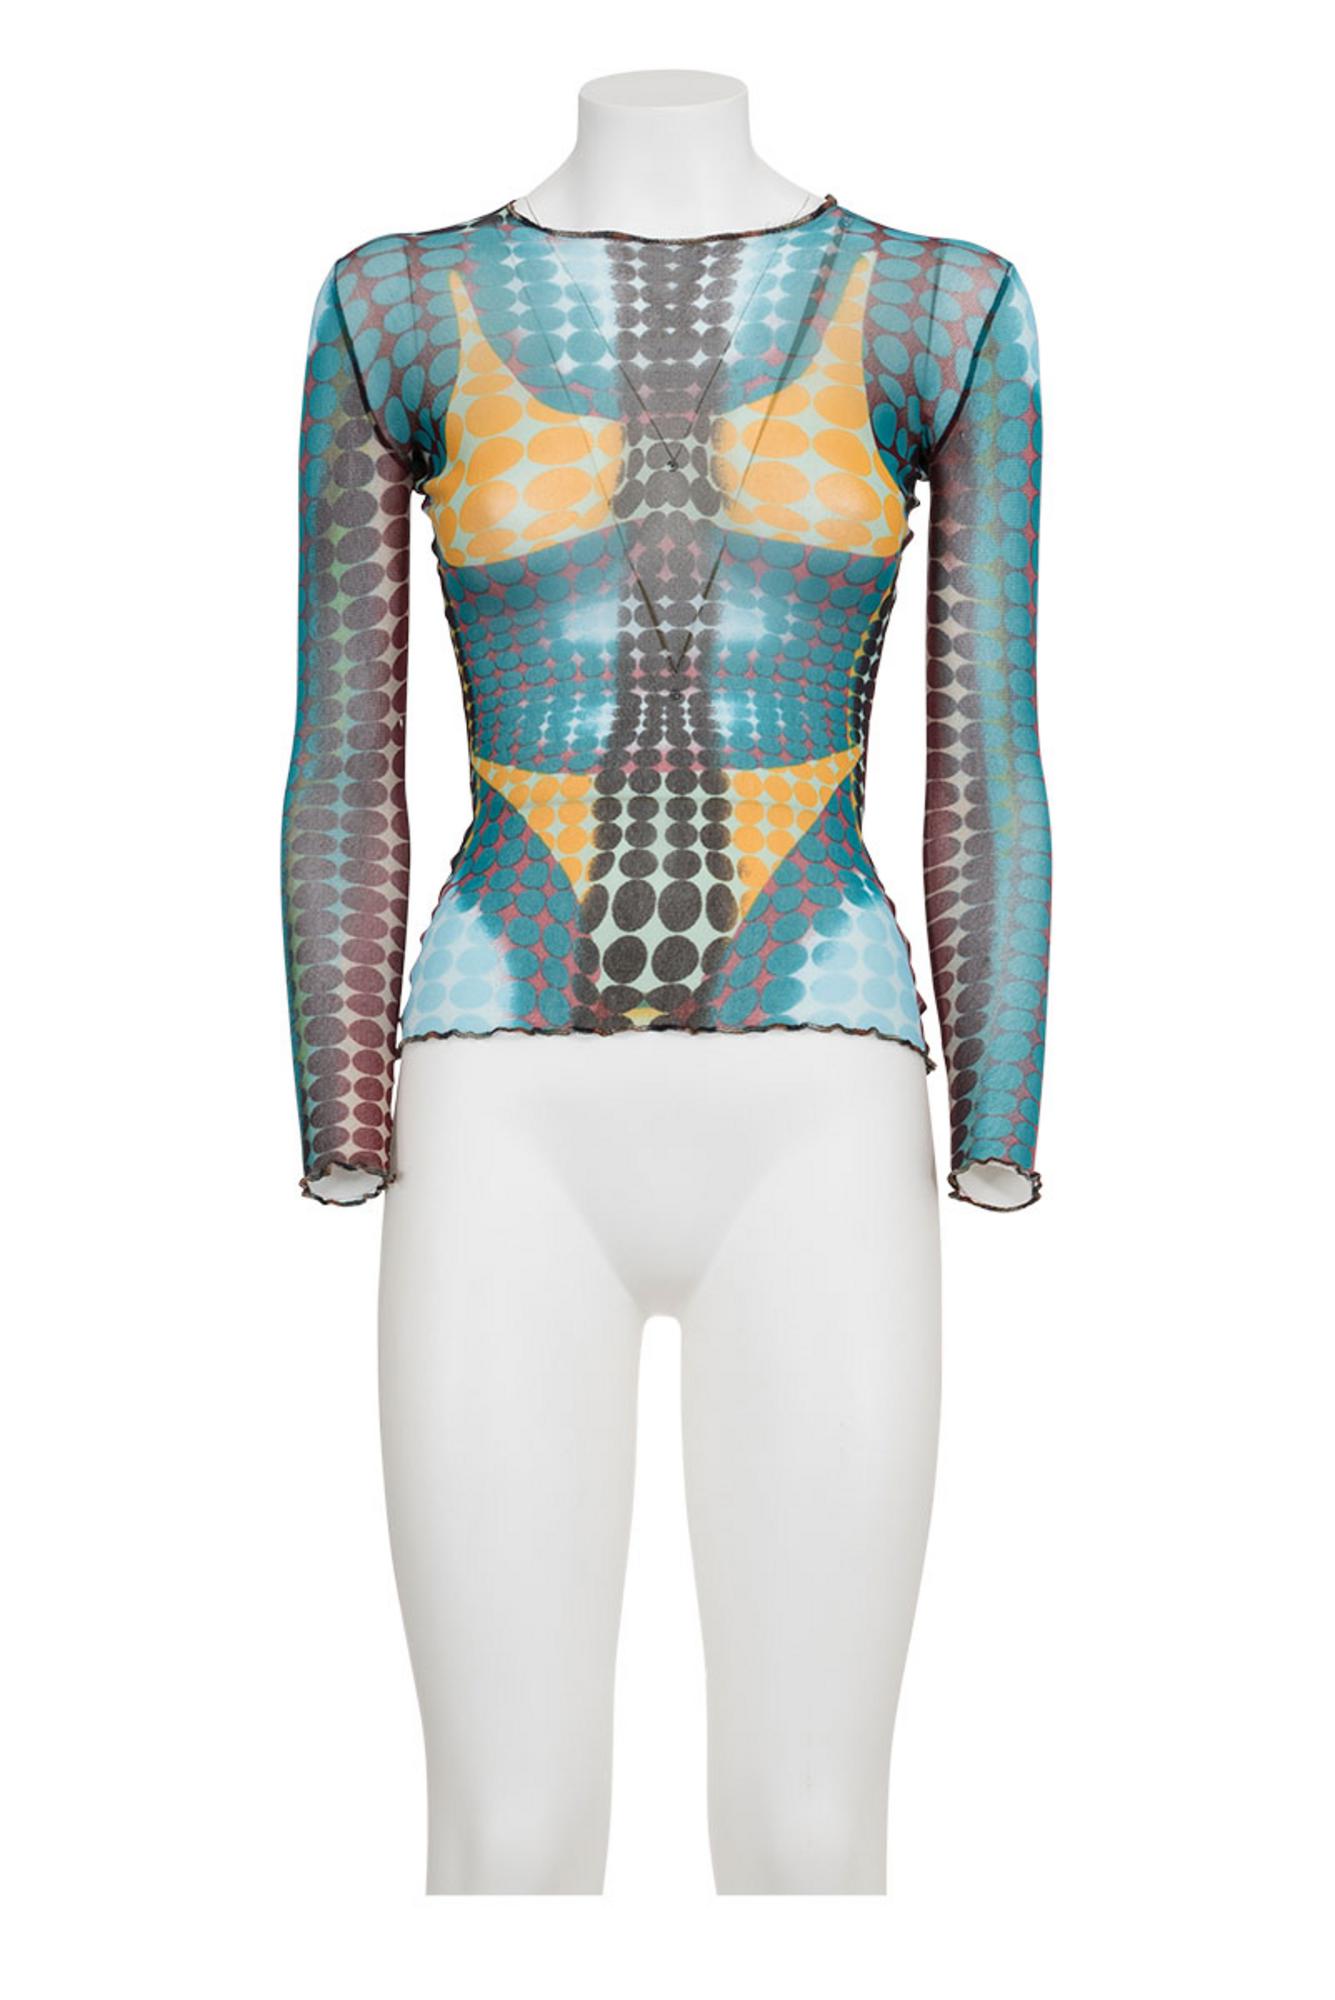 JEAN PAUL GAULTIER Rare and iconic cyberdots tulle top DESCRIPTION: Rare and...